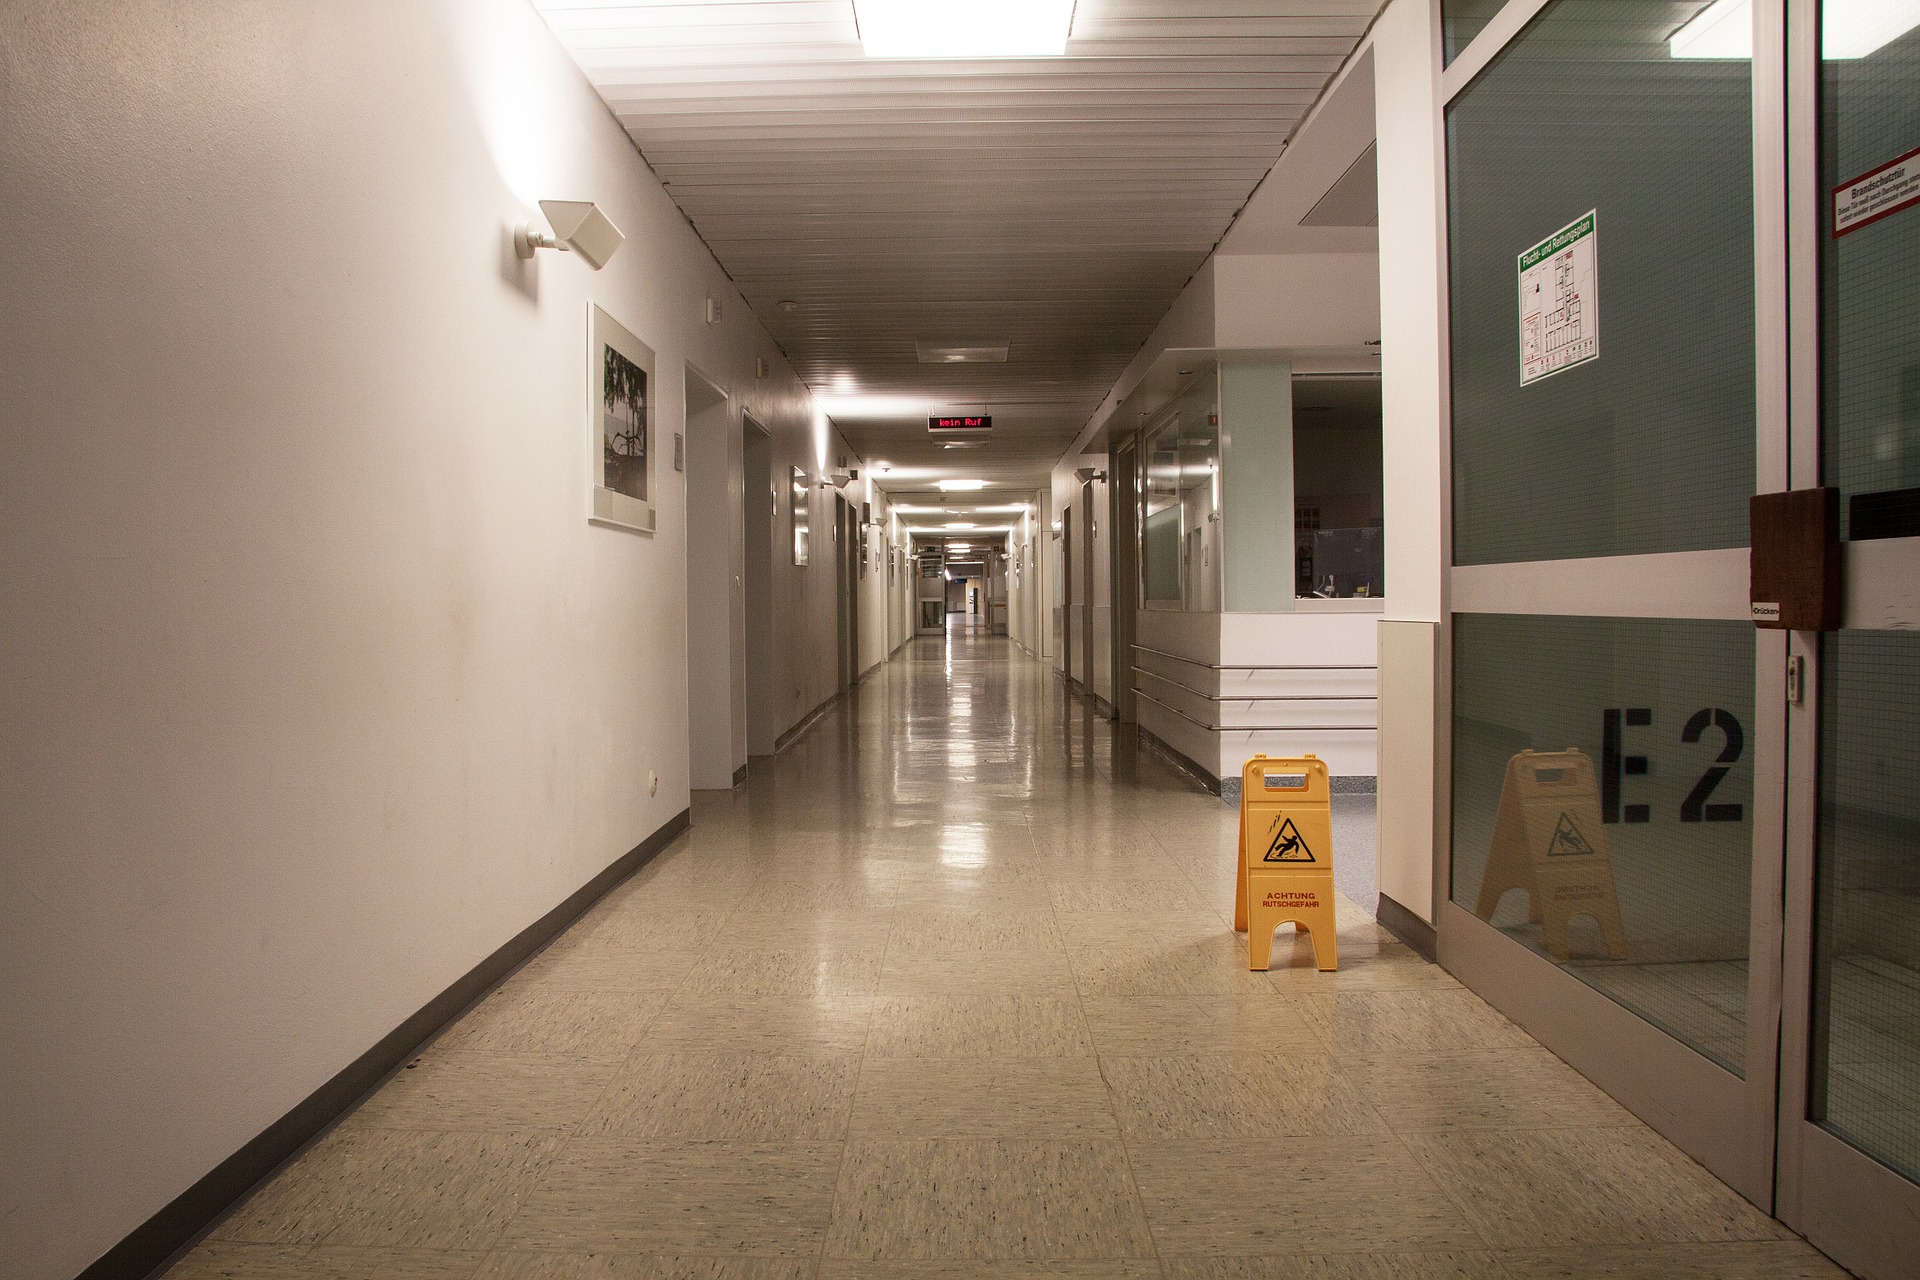 Keeping Everyone Safe With Hospital Cleaning